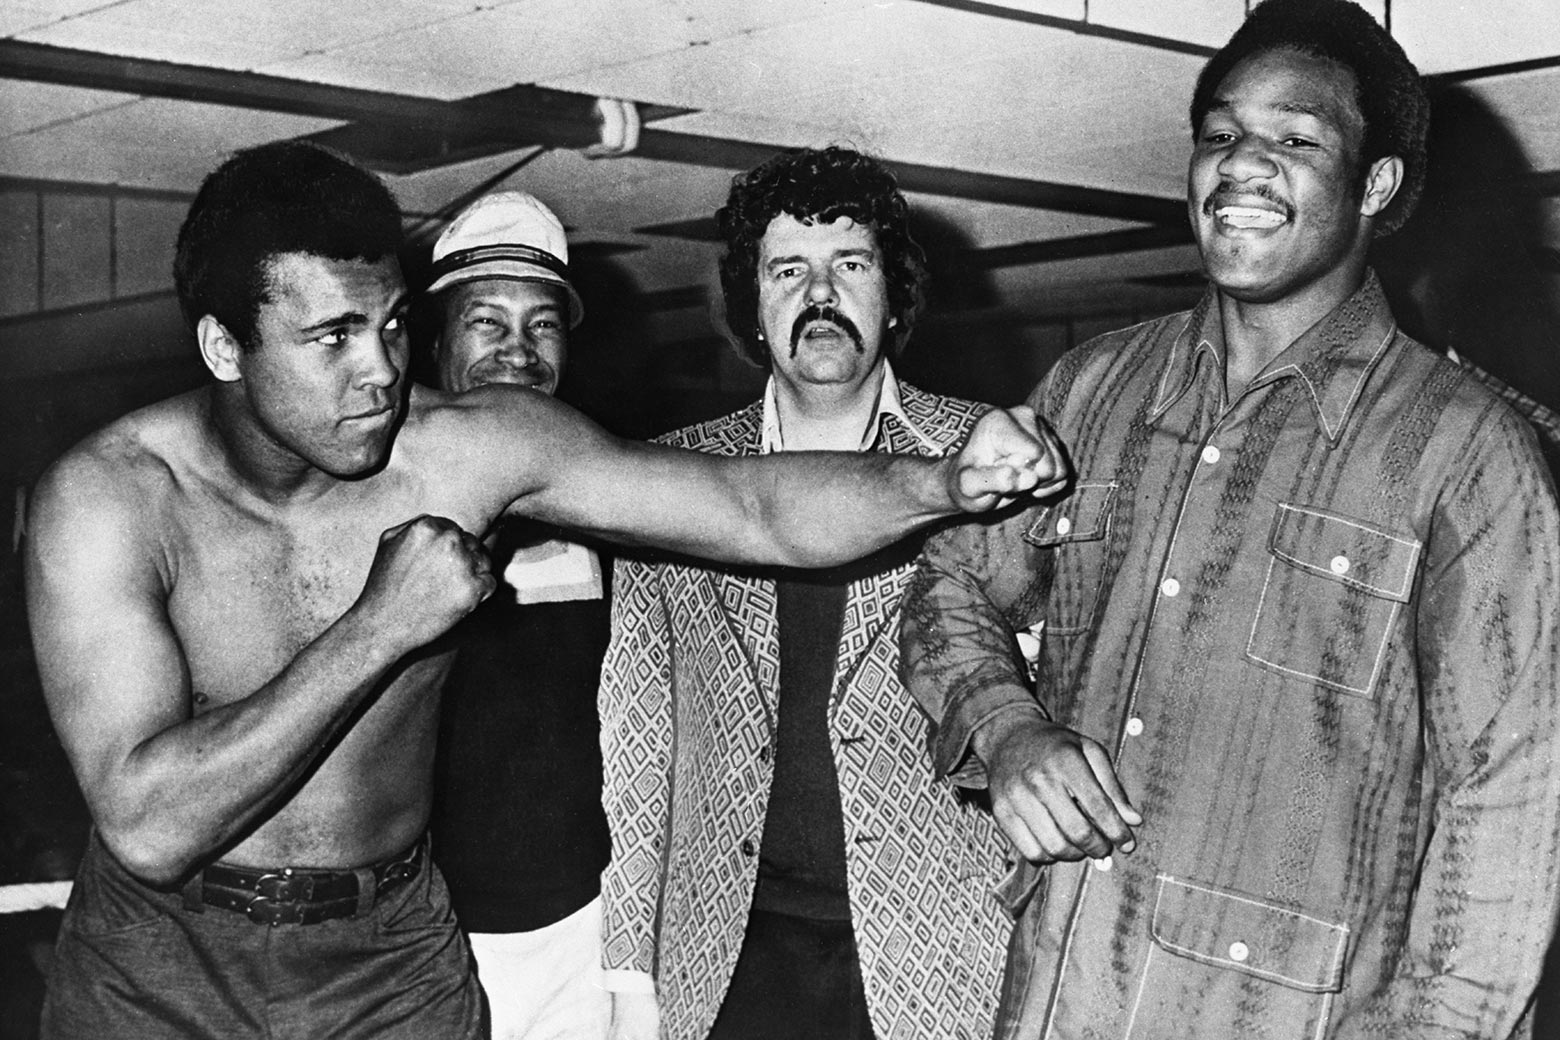 A black and white photo in which world heavyweight boxing champion George Foreman, right, smiles disdainfully as former champ Muhammad Ali, left, goads him. 